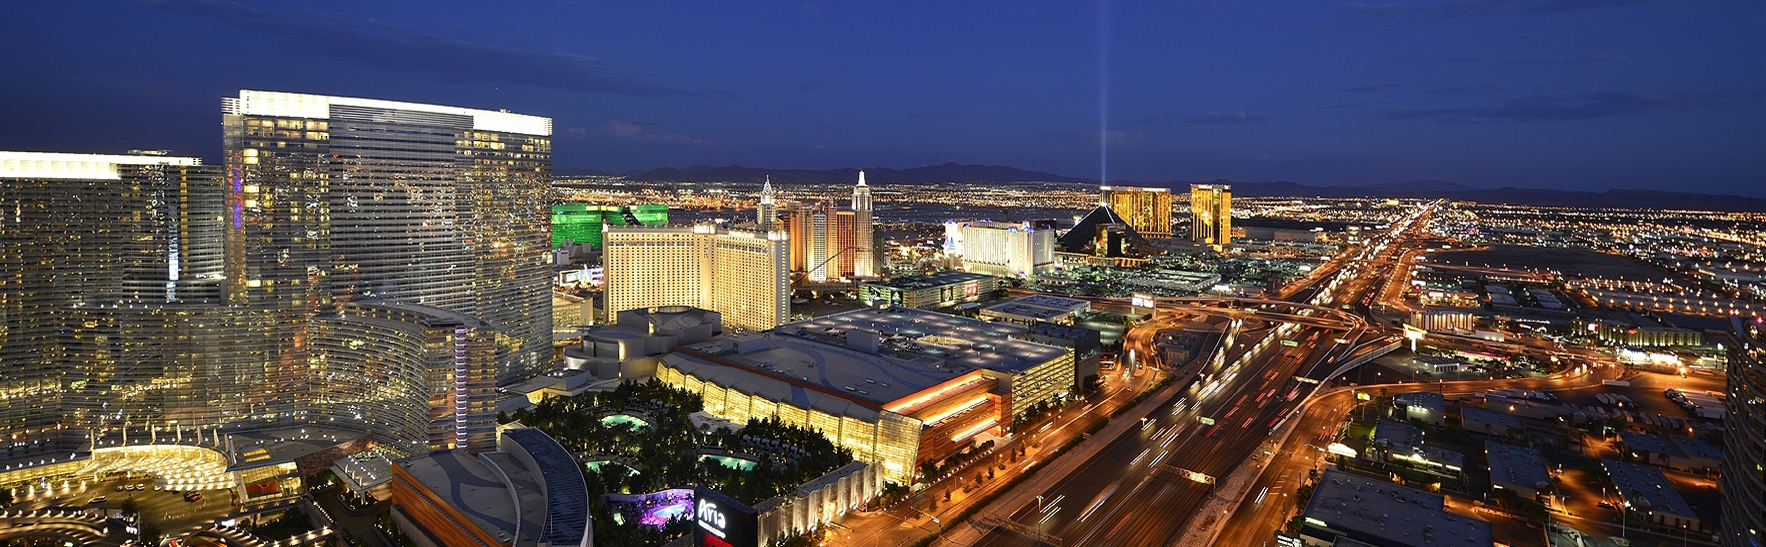 X Train From Los Angeles To Las Vegas – Business Insider – Las Vegas Condos For Sale